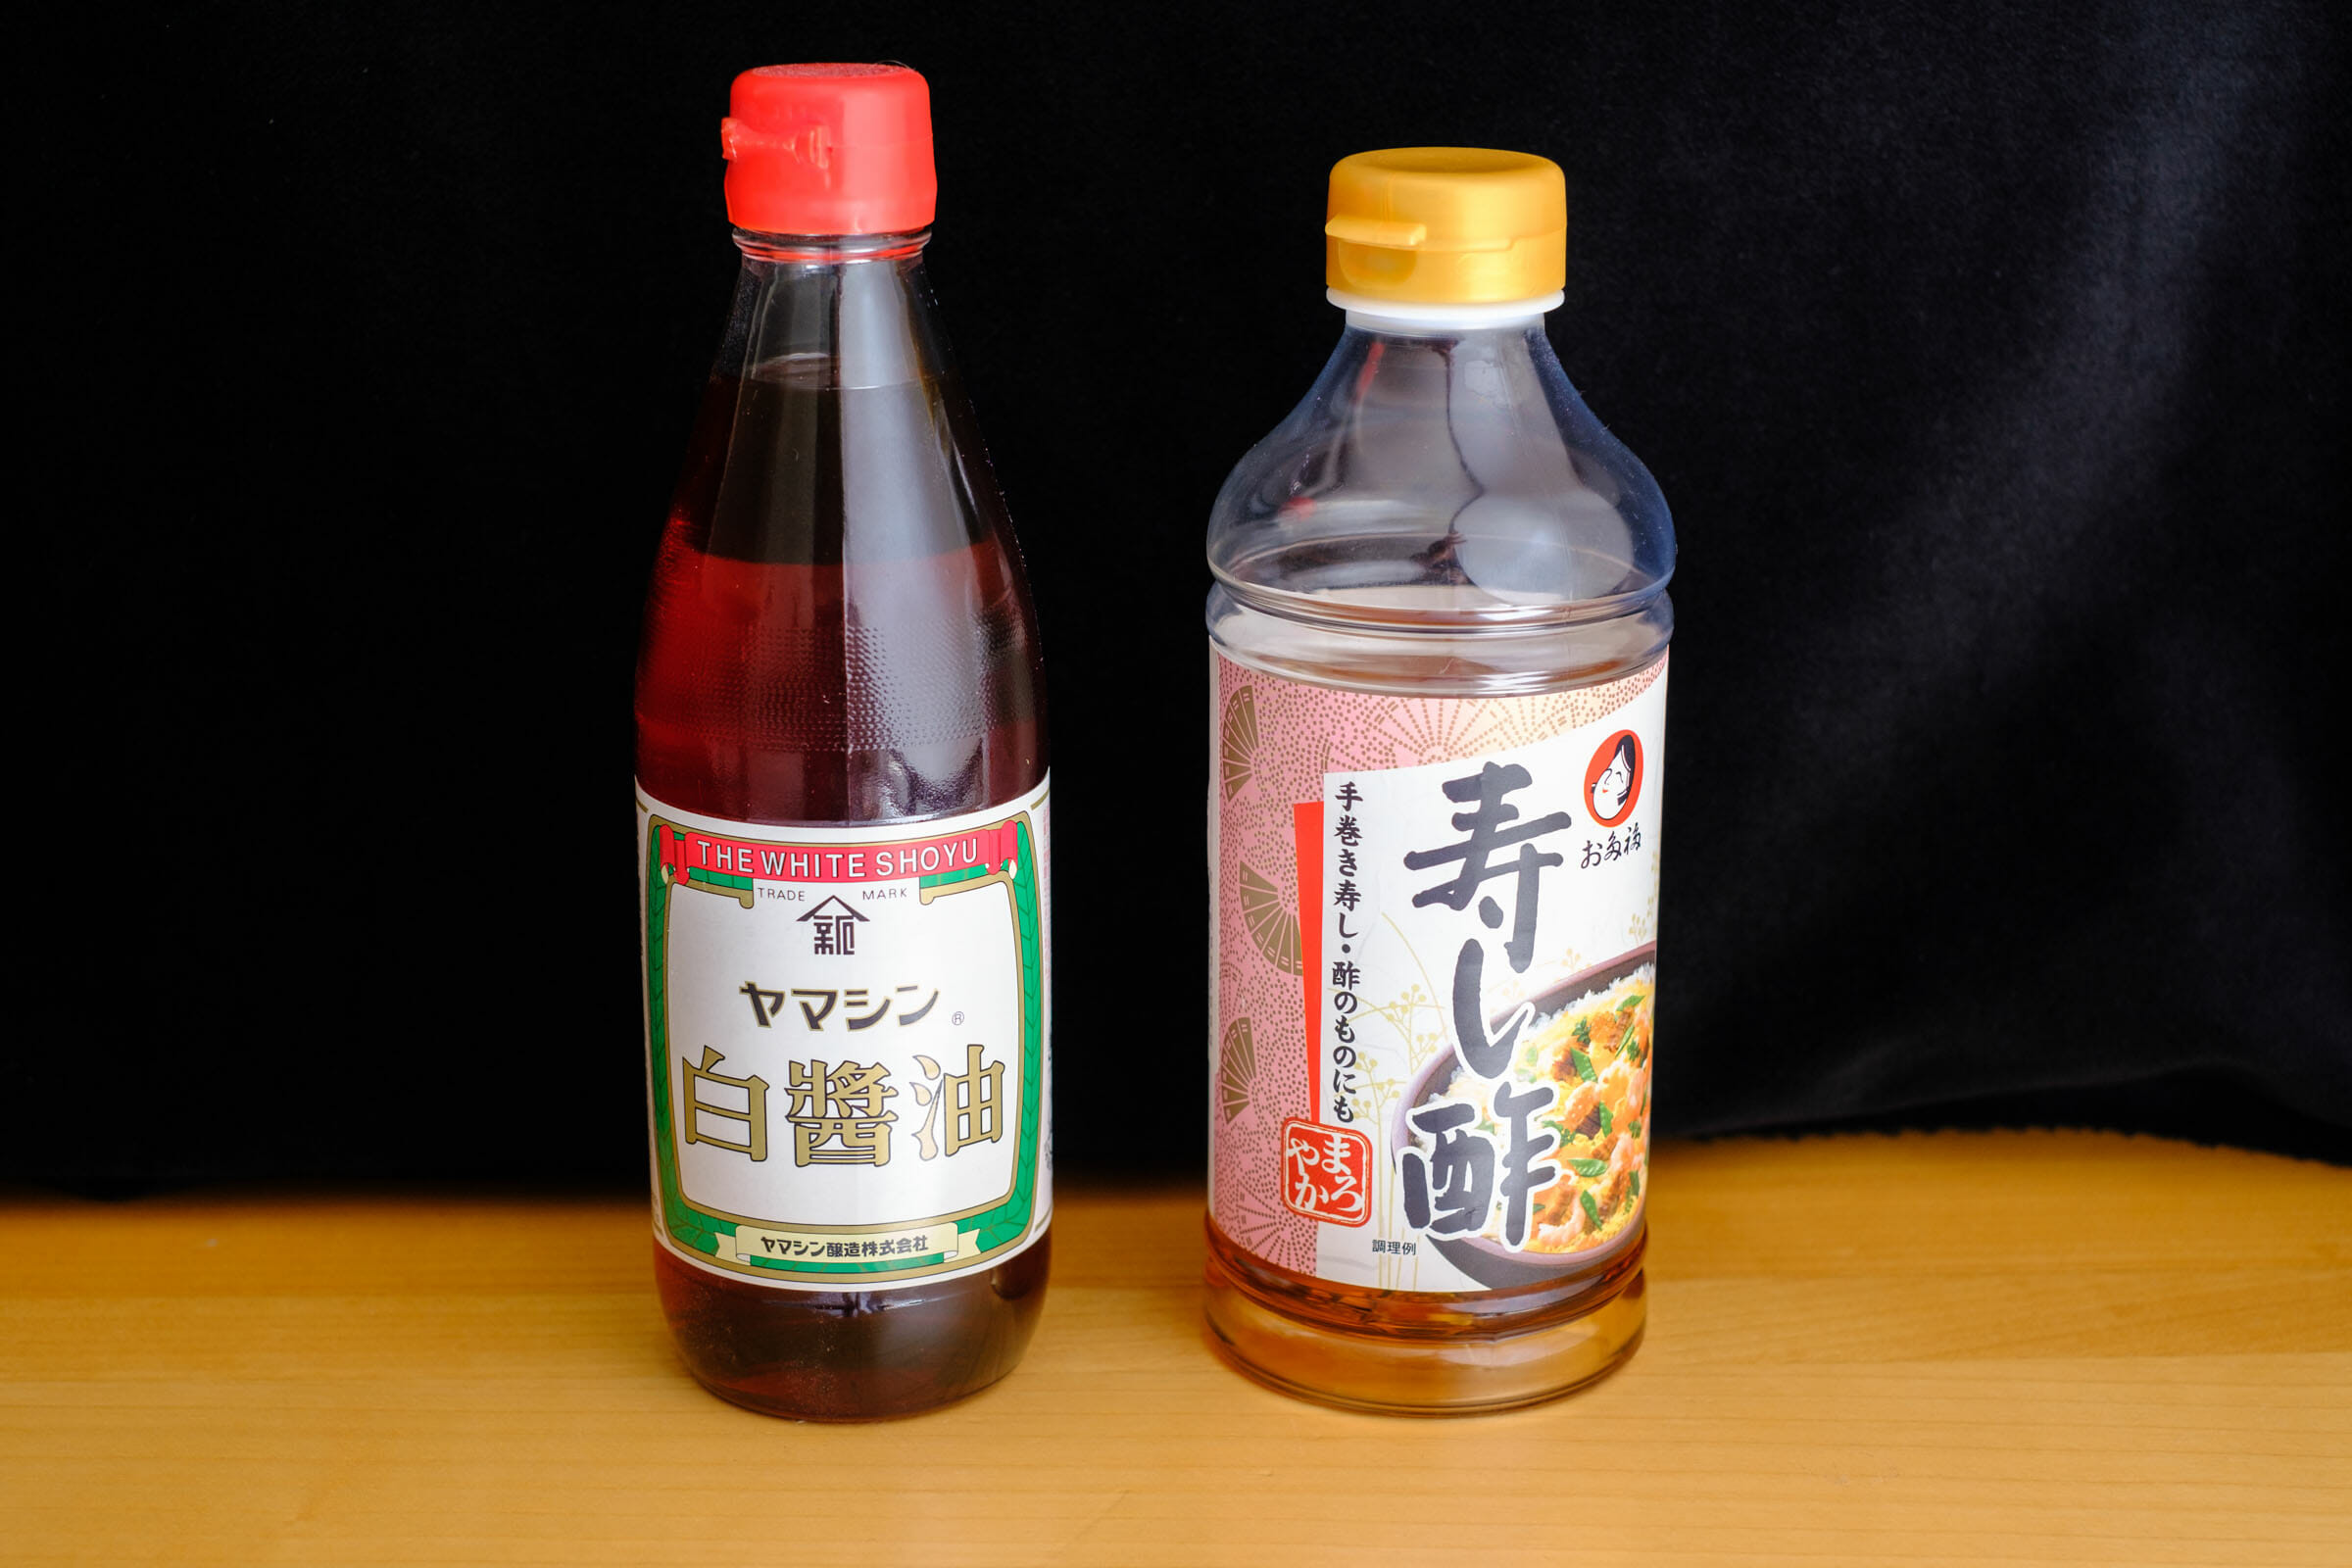 Soy sauce and sushi vinegar